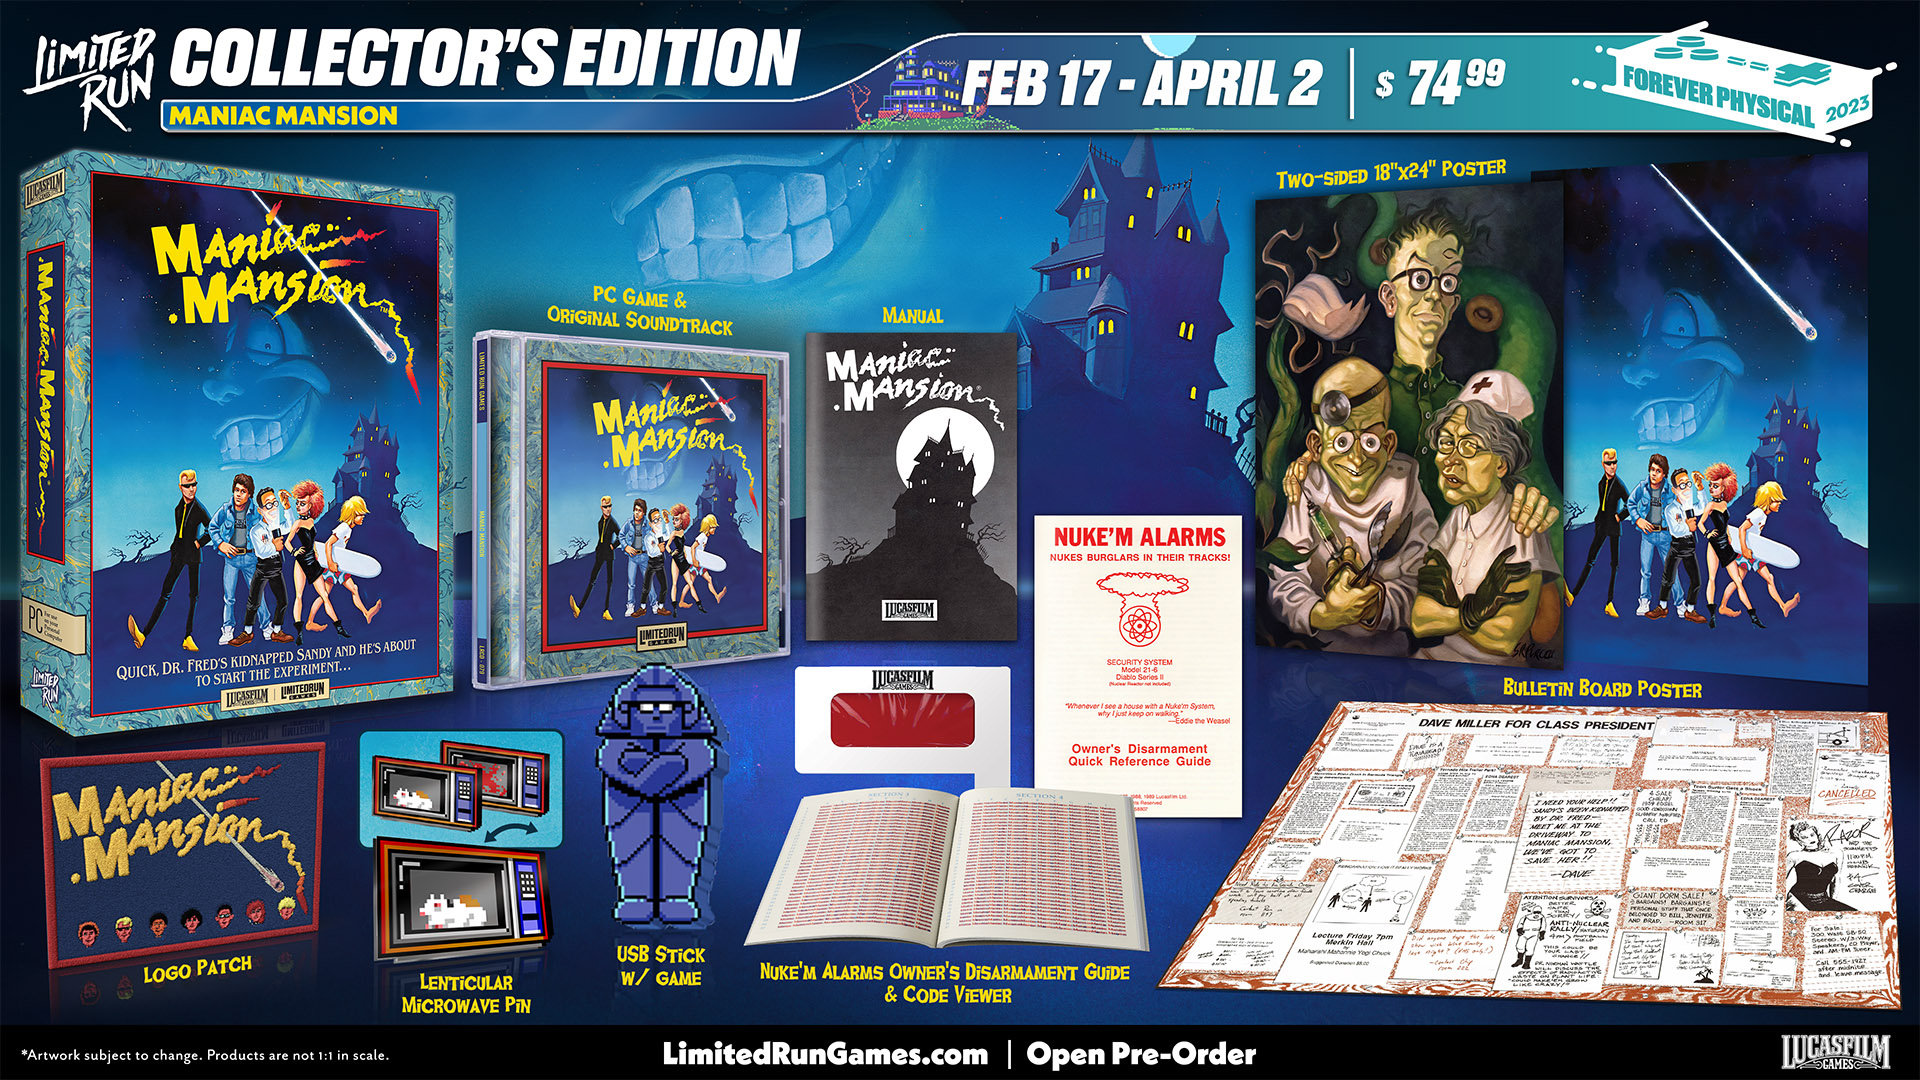 Maniac Mansion products